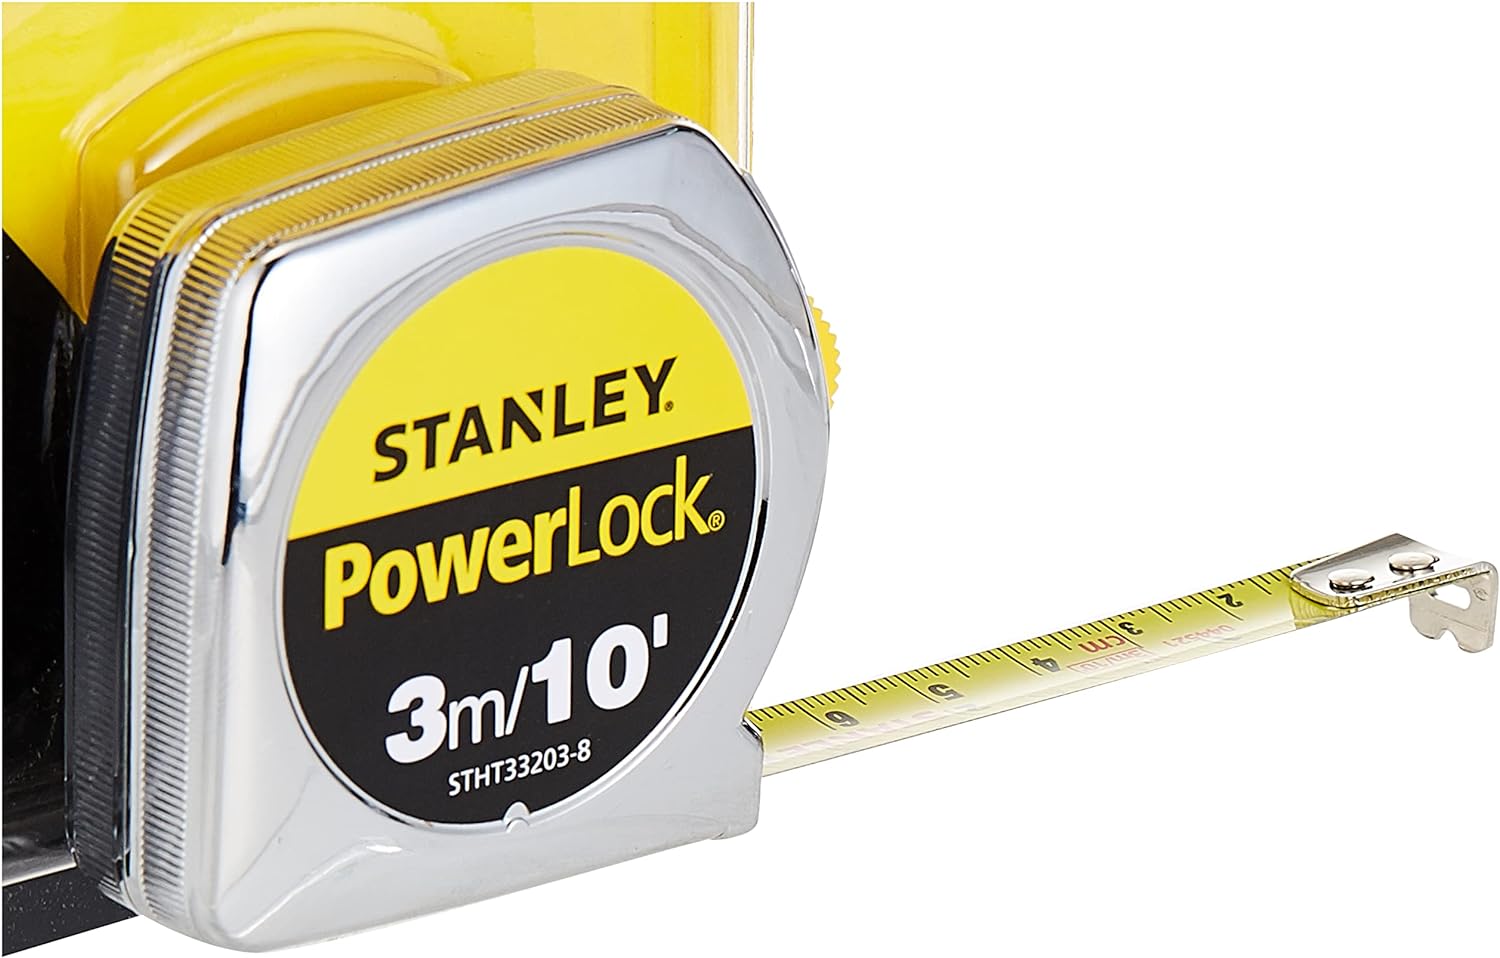 Stanley 3m Measuring Tape - STHT33203-8 | Supply Master, Accra, Ghana Tape Measure Buy Tools hardware Building materials